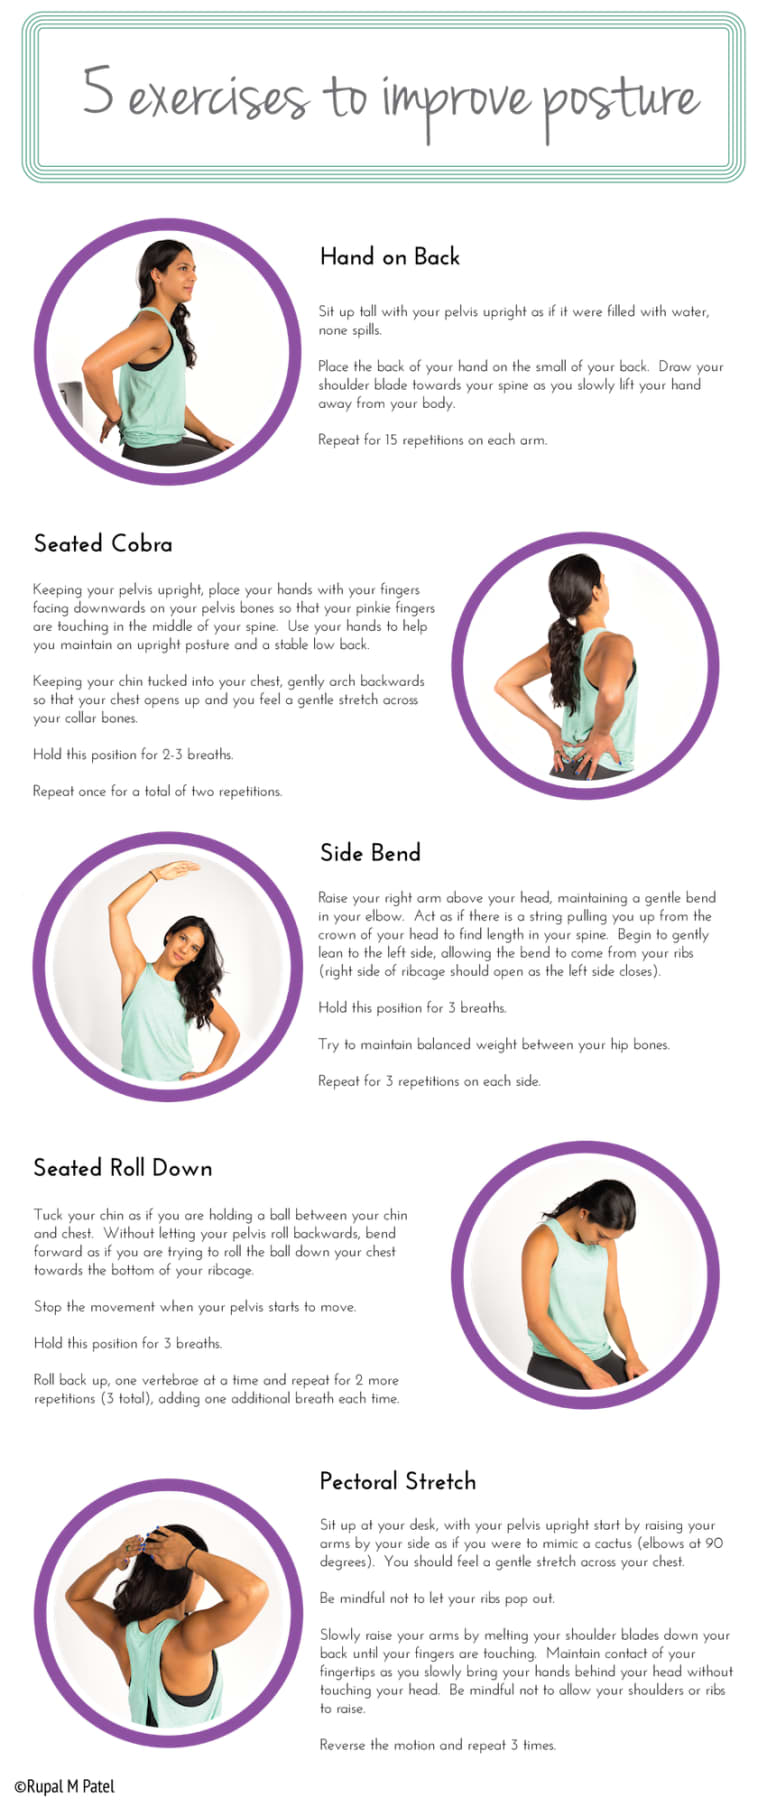 5 Exercises To Improve Your Posture (Infographic)